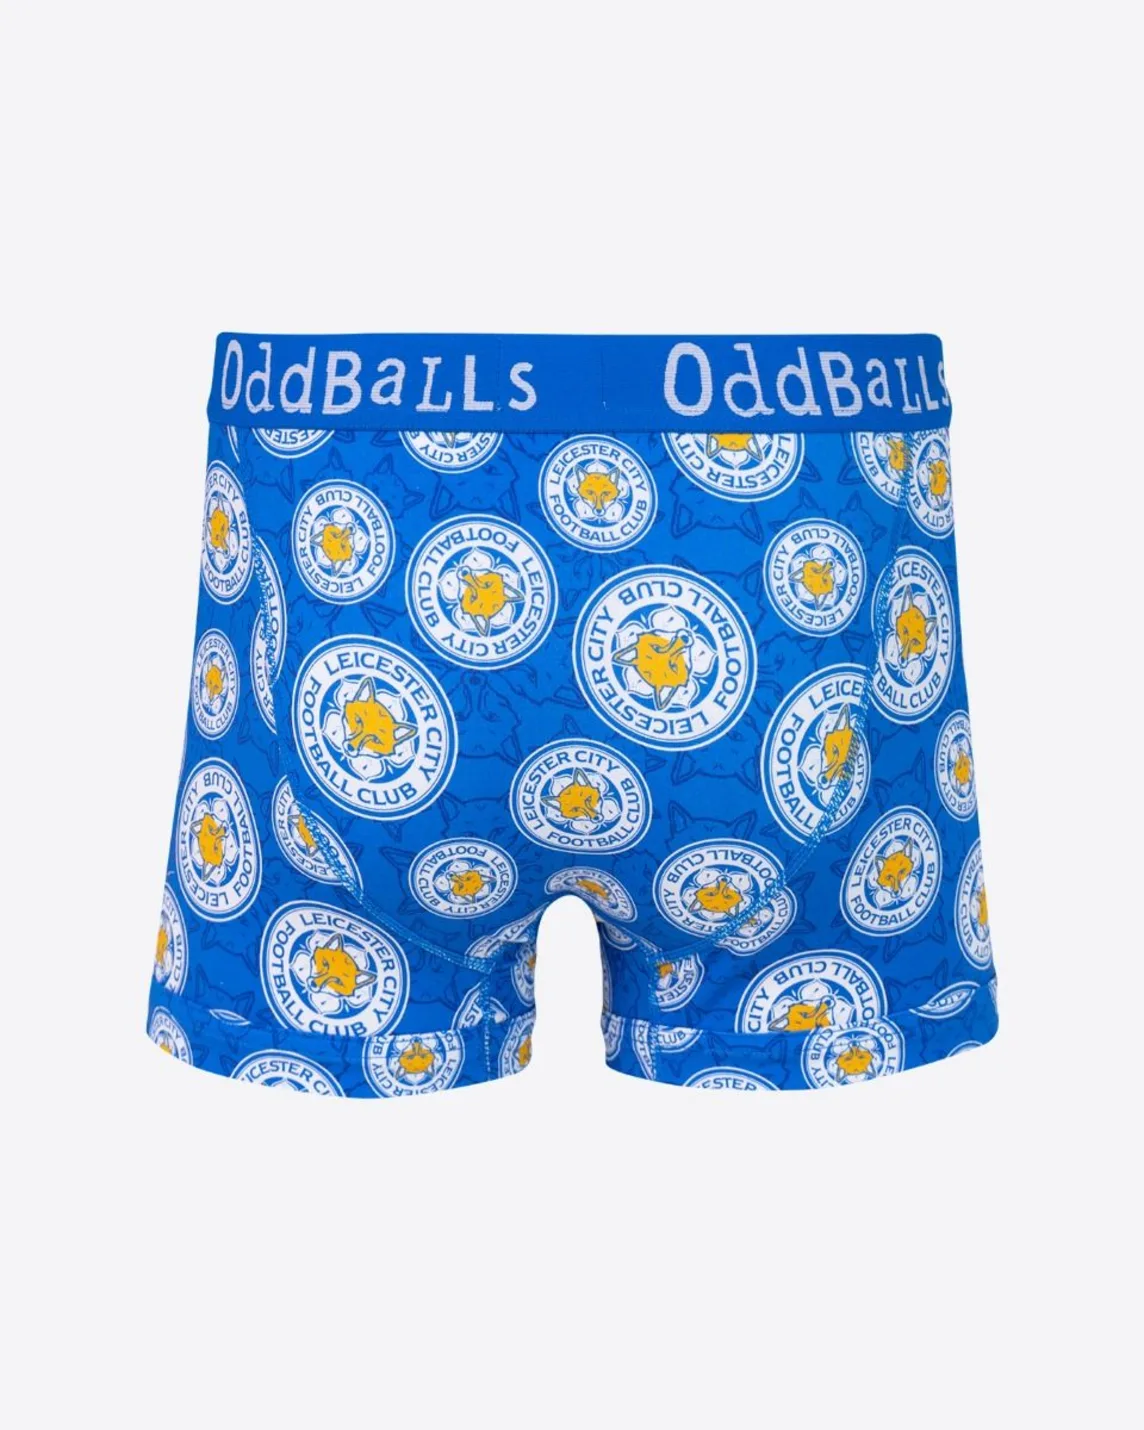 Leicester City x OddBalls Crest Boxers Mens